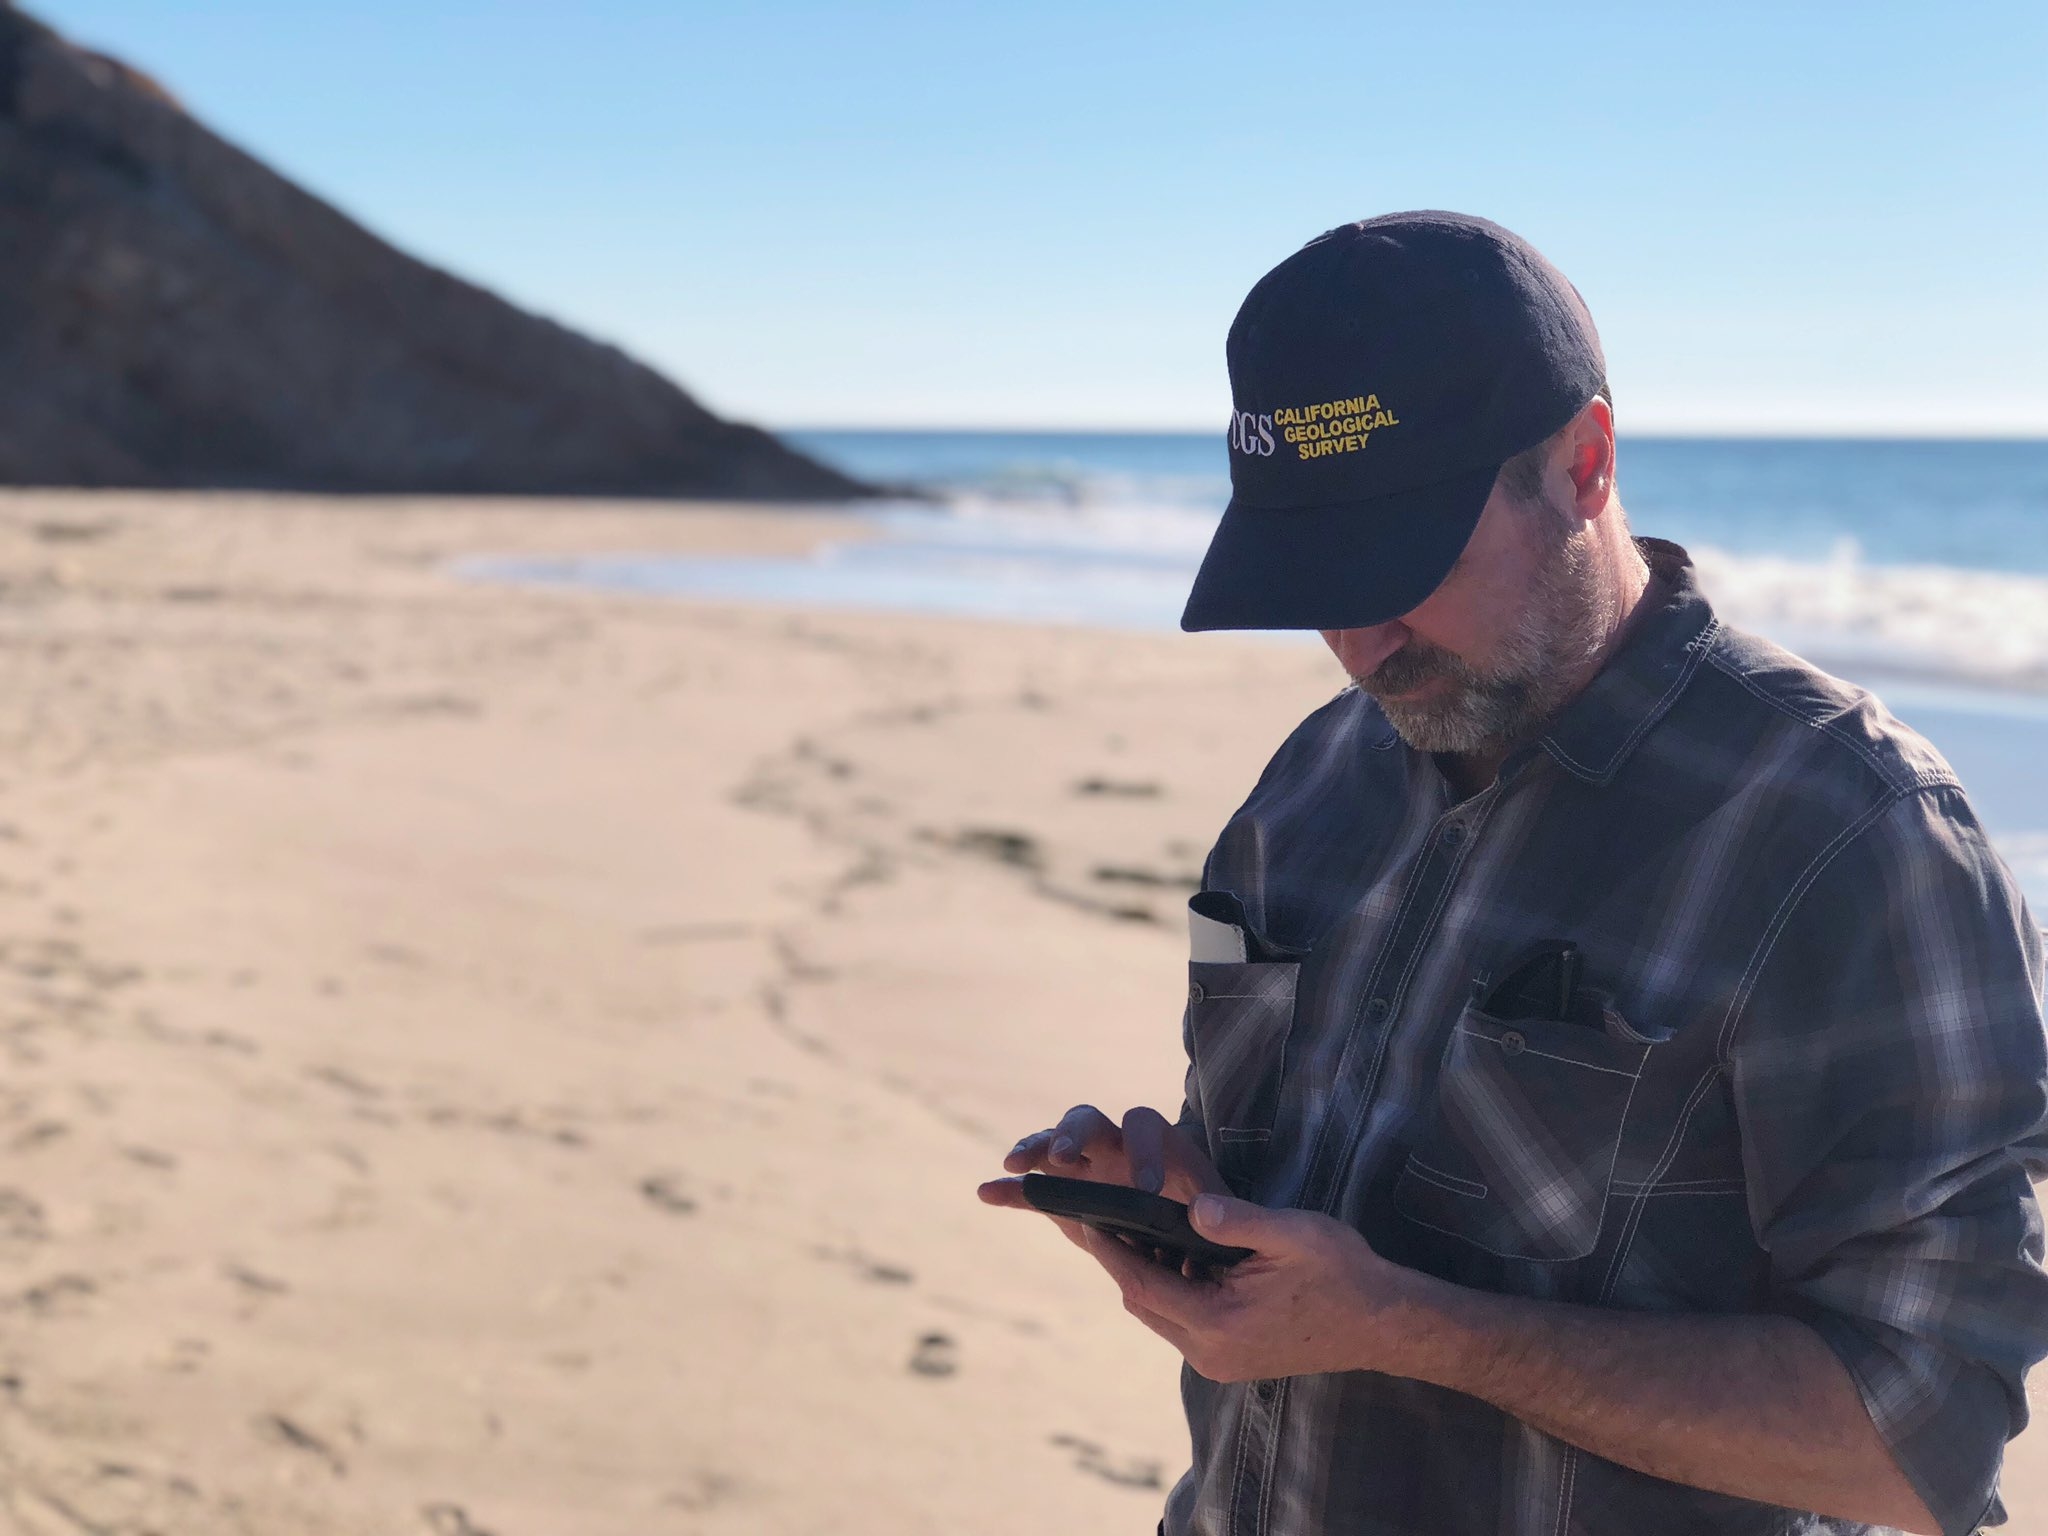 Photo of Mike D. from California Geological Survey collecting tsunami damage evidence in California